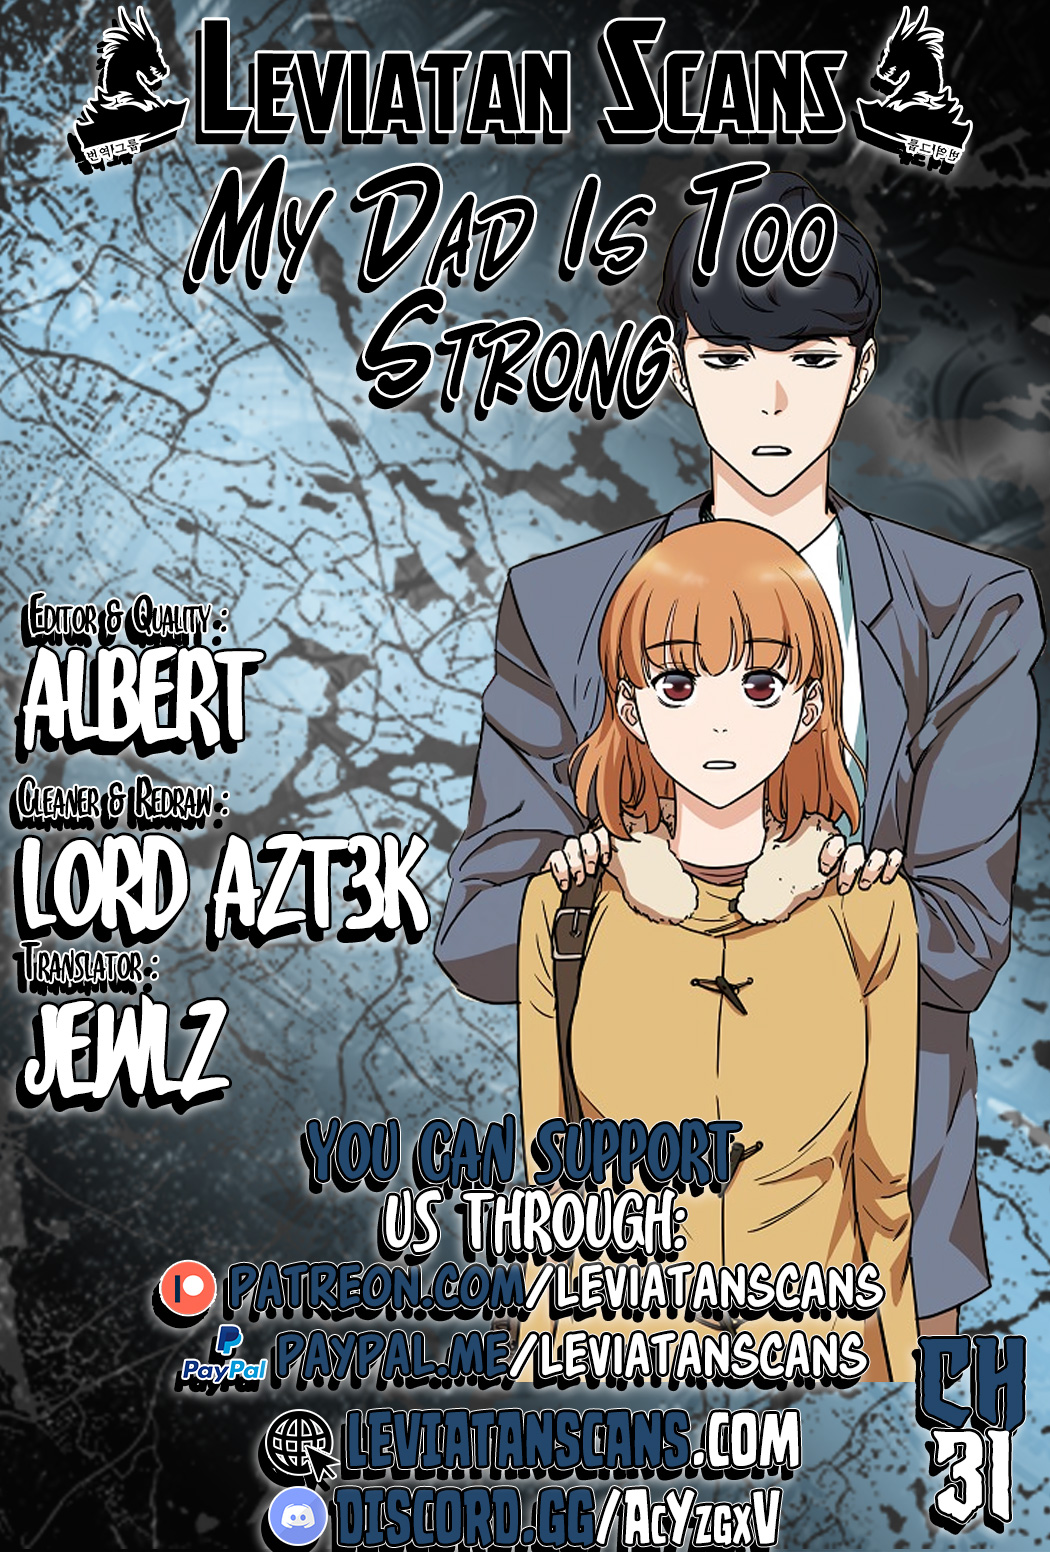 My Dad is Too Strong - Chapter 2610 - Image 1